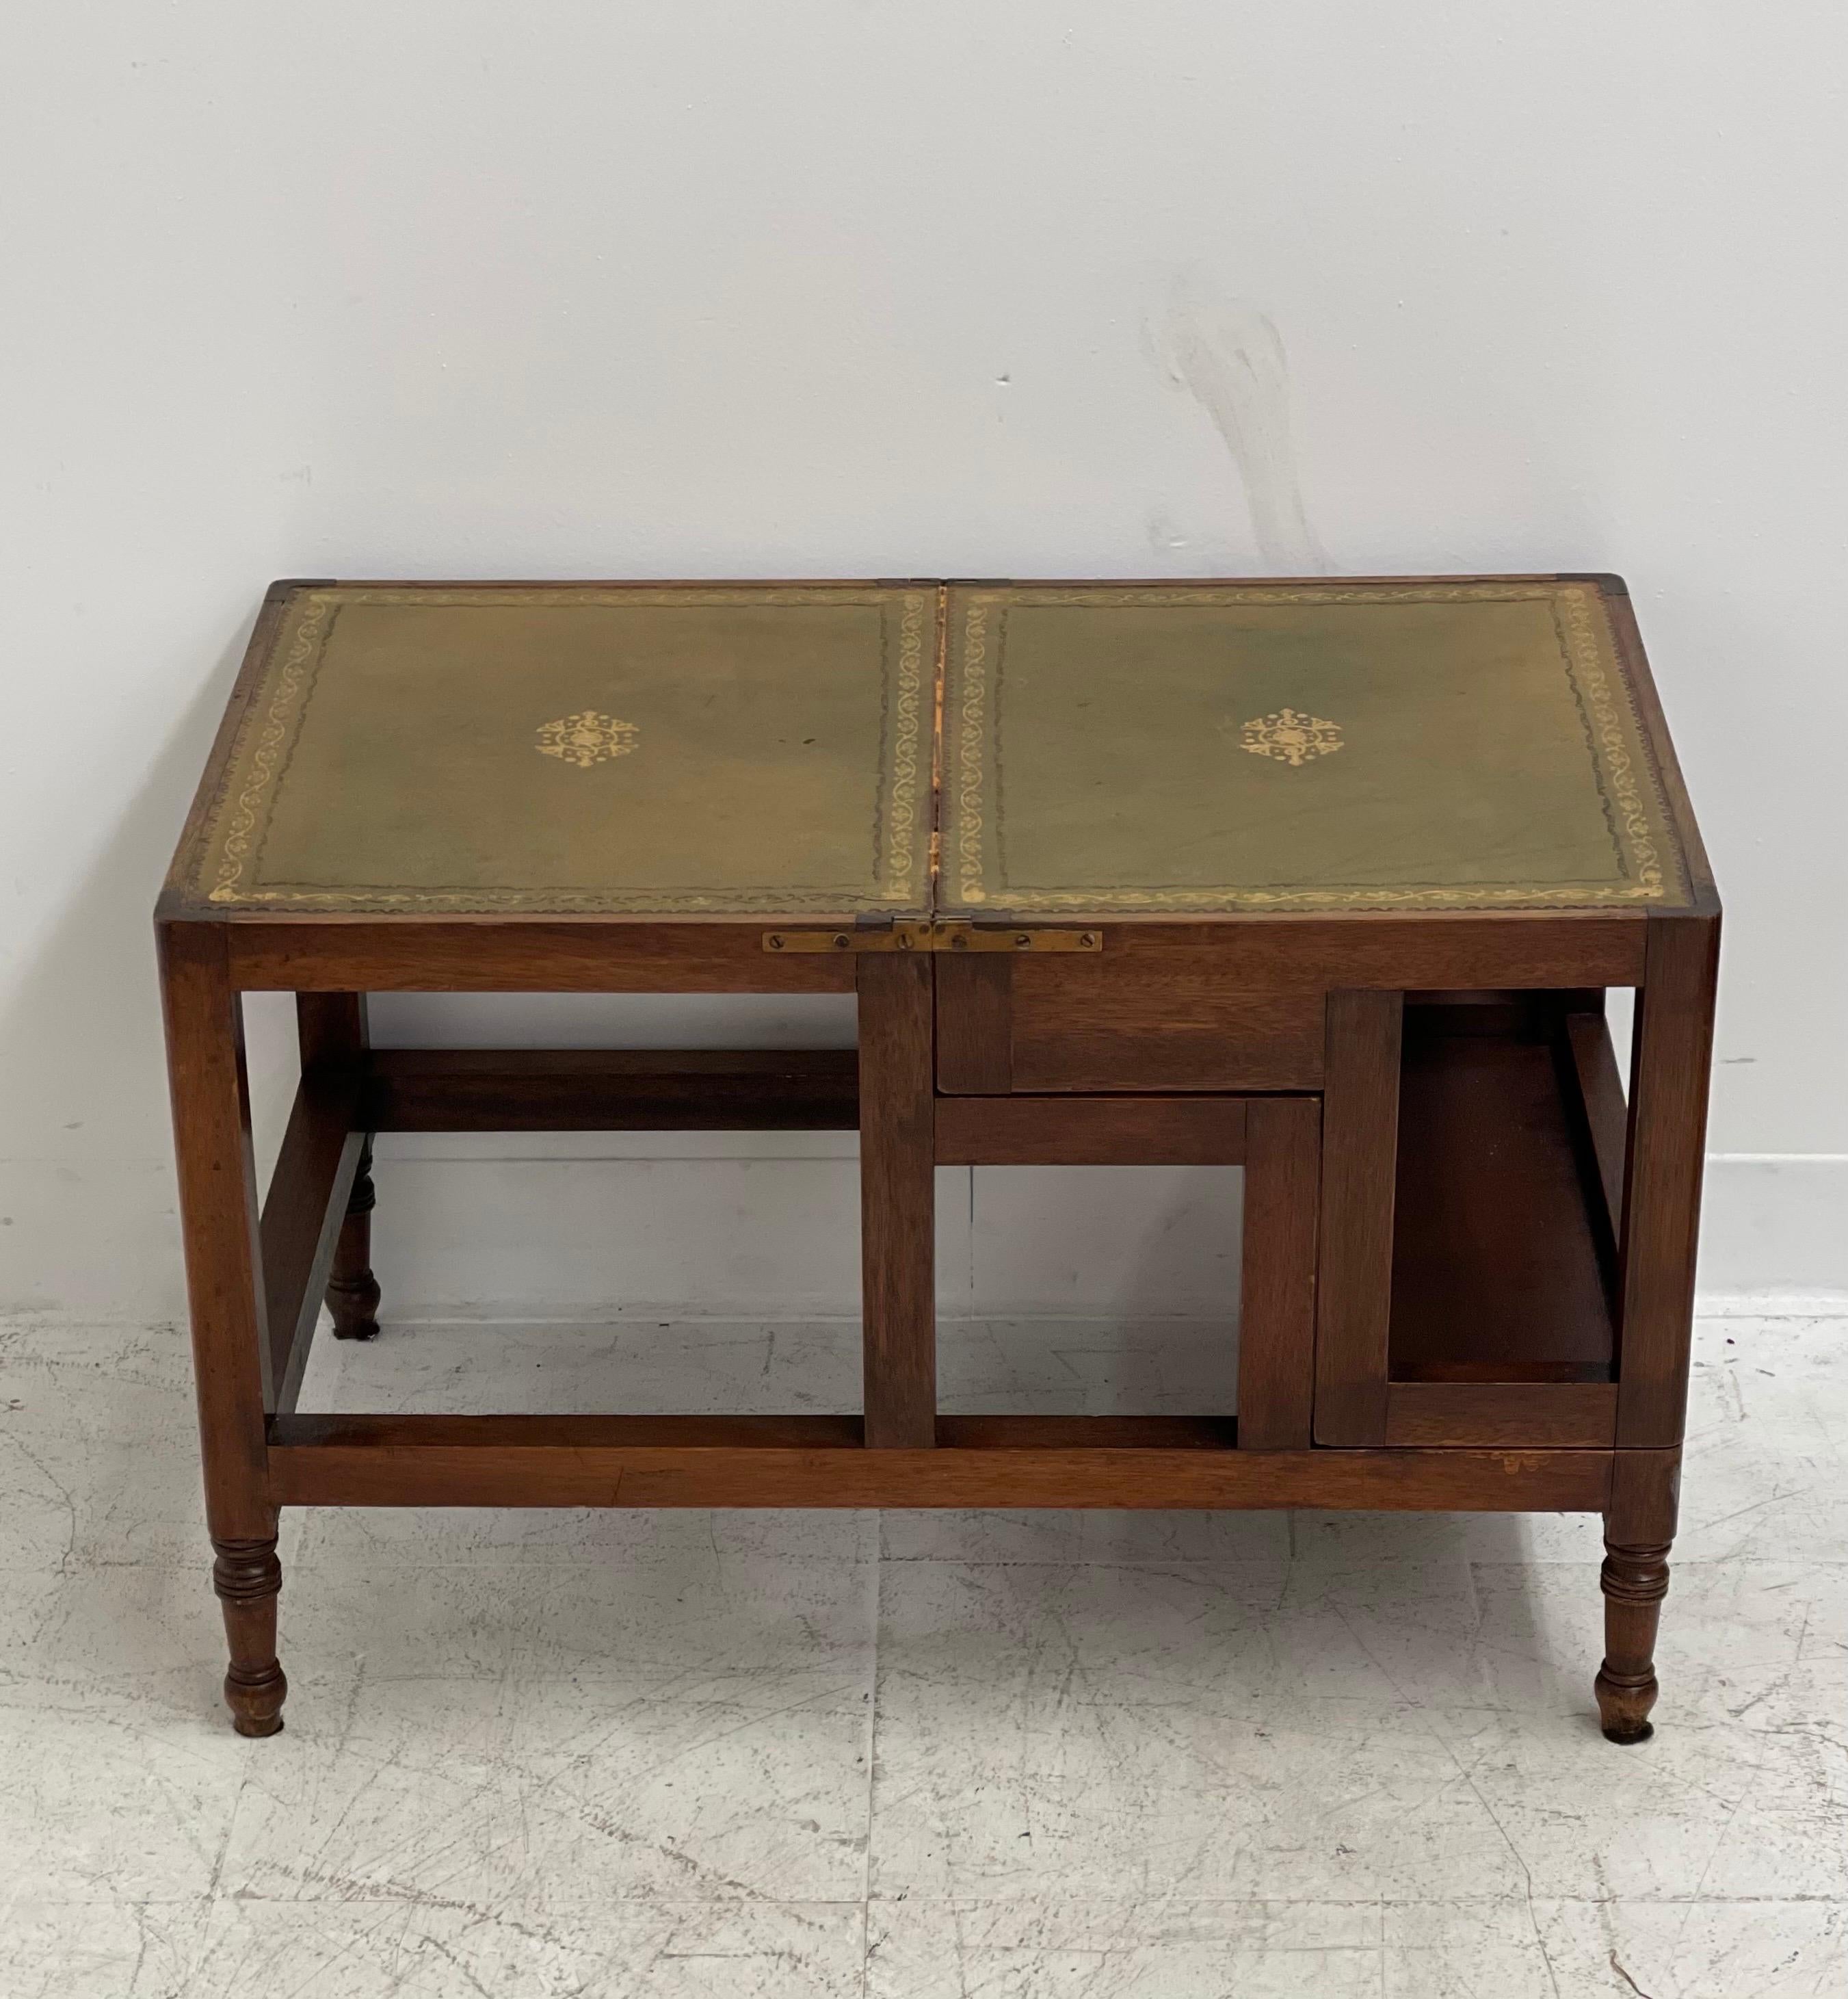 A George III design, mahogany four-step metamorphic library coffee table, with a naturally aged decorative gilt incised leather top and leathered steps opening to form a library step ladder.


Dimensions
Steps. 18 W ; 28 H ; 28 D
Table 28 W ;